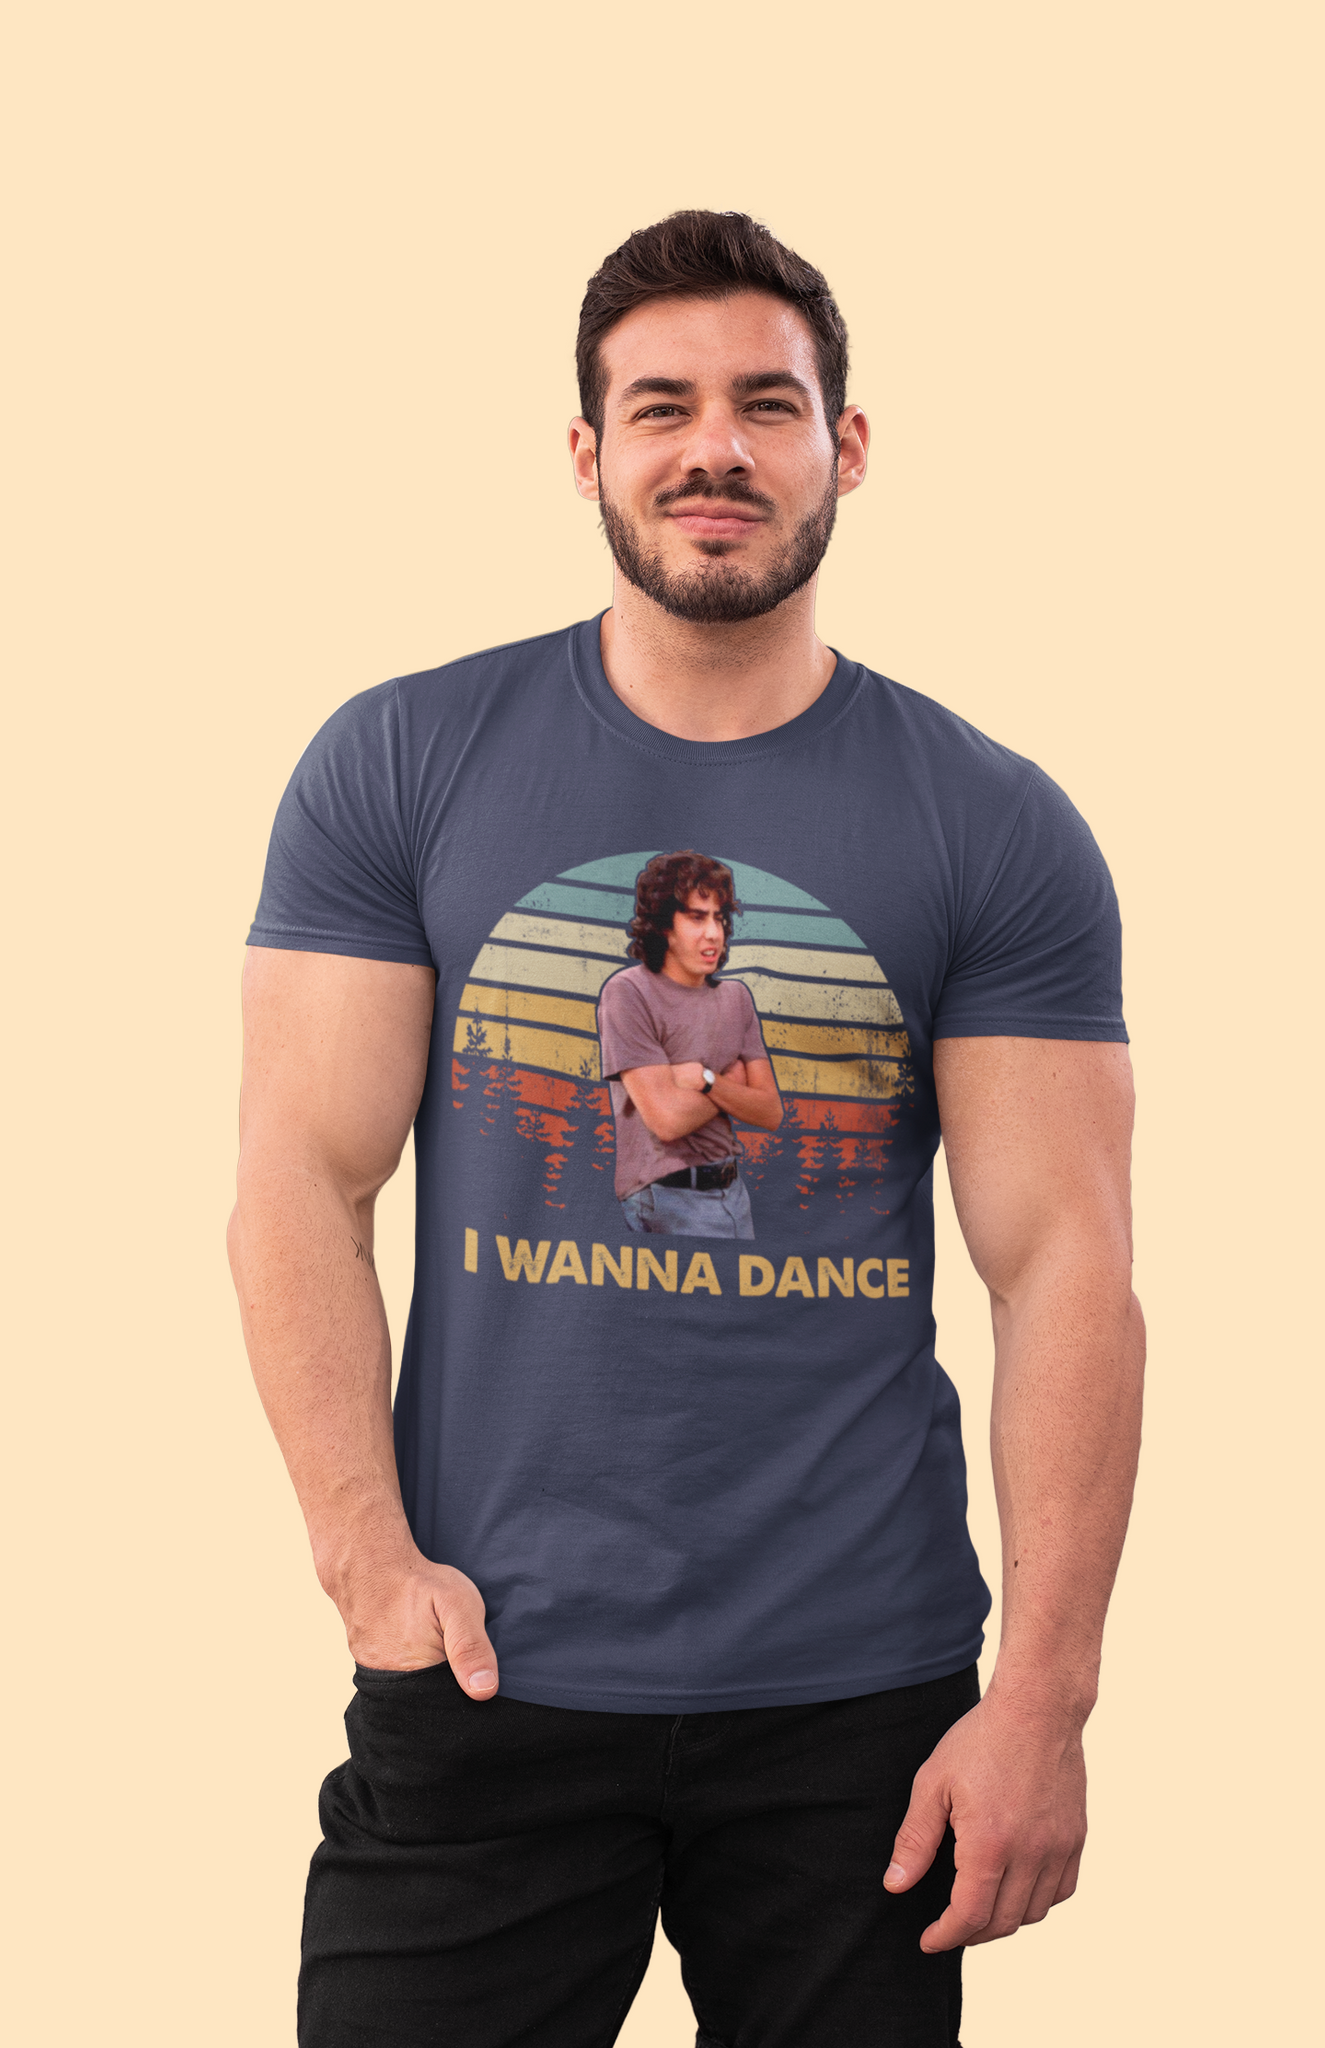 Dazed And Confused T Shirt, Mike Newhouse T Shirt, I Wanna Dance Tshirt